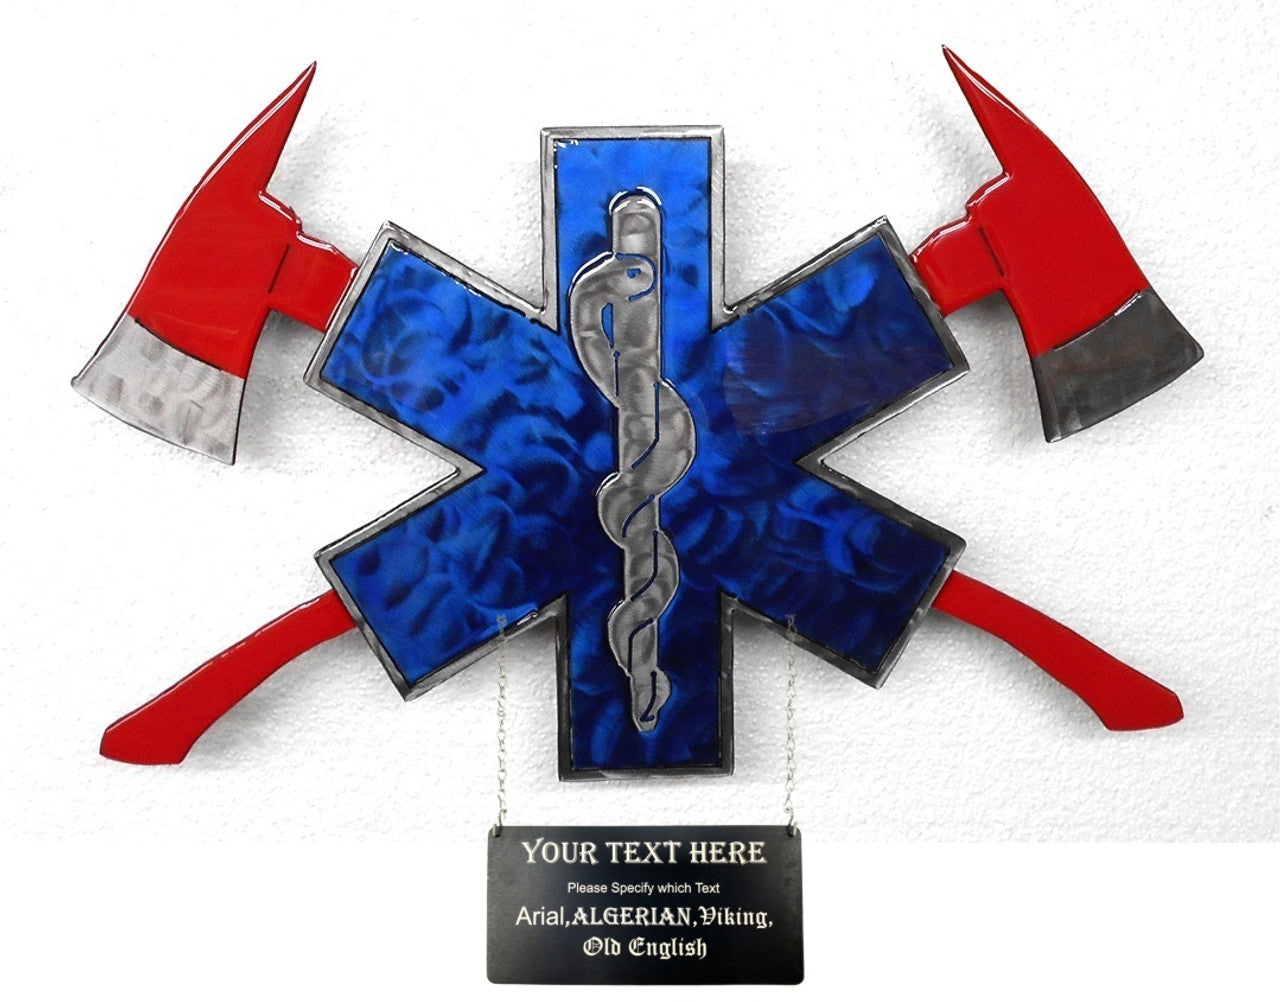 EMT With Crossed Fire Axes